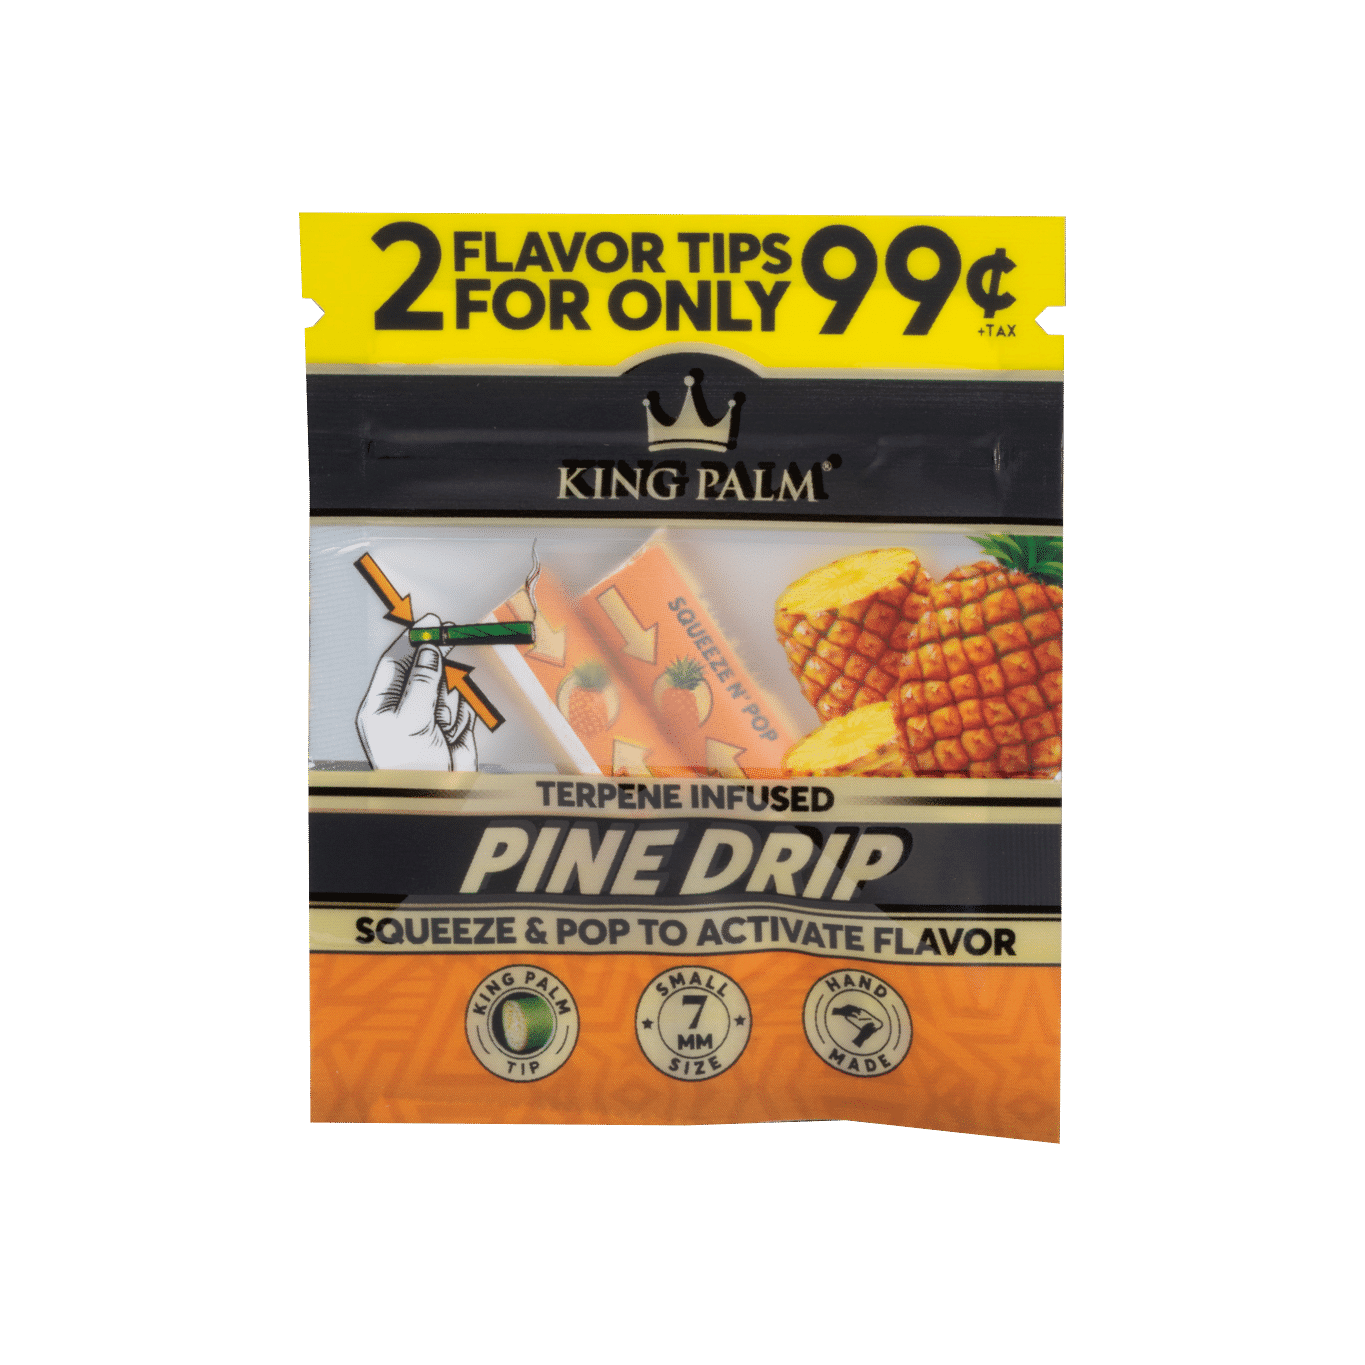 King Palm Terpene infused Pine Drip Flavored Tips